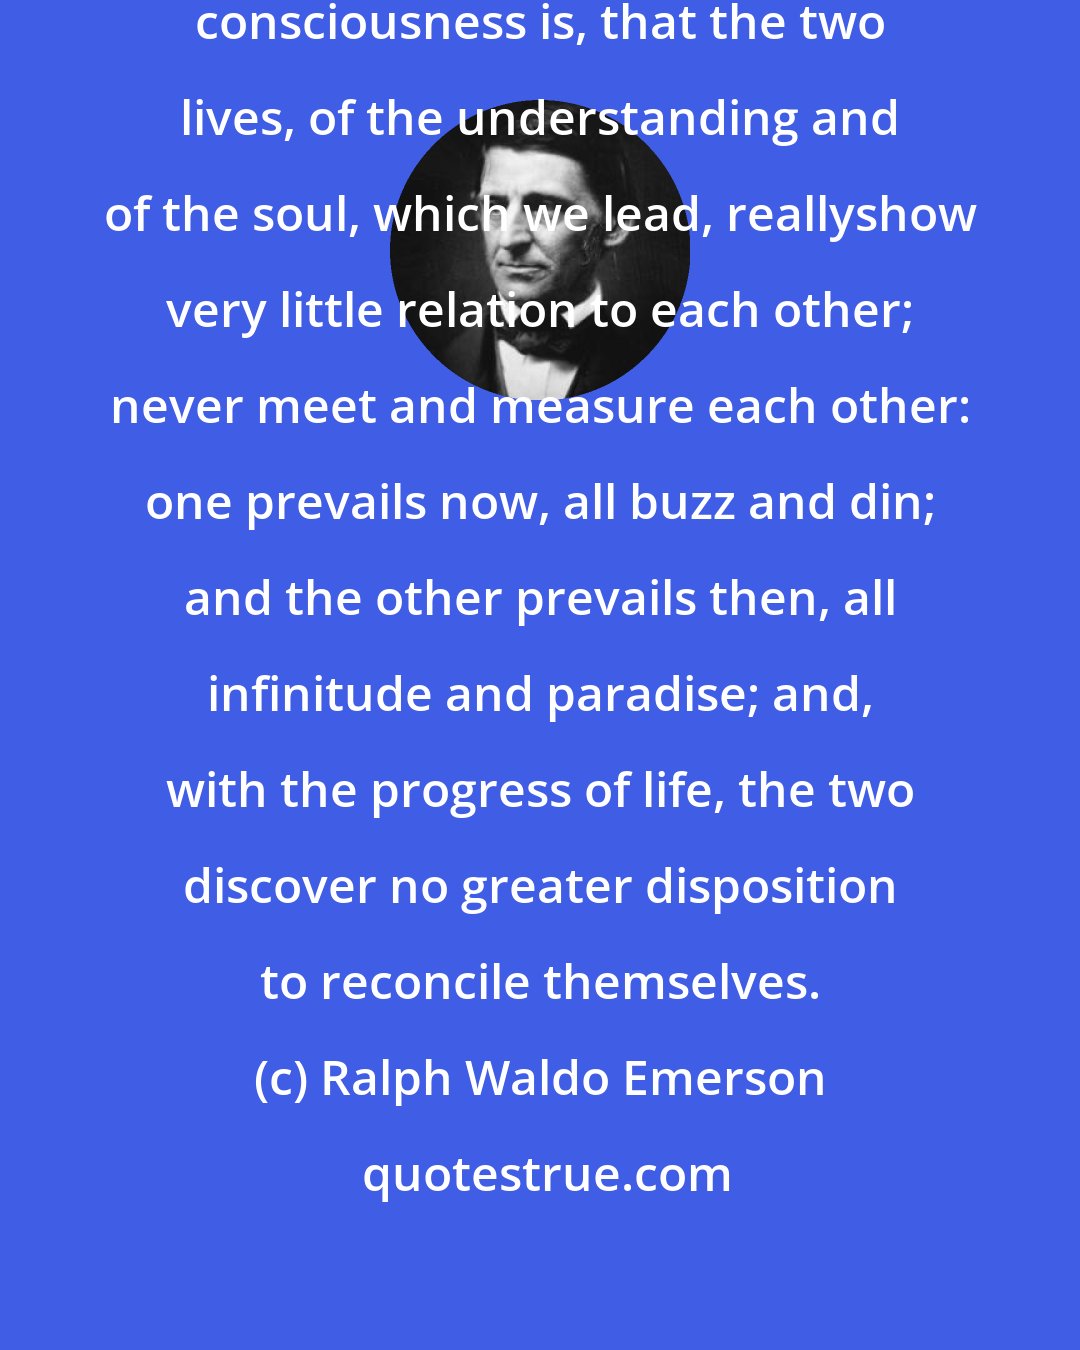 Ralph Waldo Emerson: The worst feature of this double consciousness is, that the two lives, of the understanding and of the soul, which we lead, reallyshow very little relation to each other; never meet and measure each other: one prevails now, all buzz and din; and the other prevails then, all infinitude and paradise; and, with the progress of life, the two discover no greater disposition to reconcile themselves.